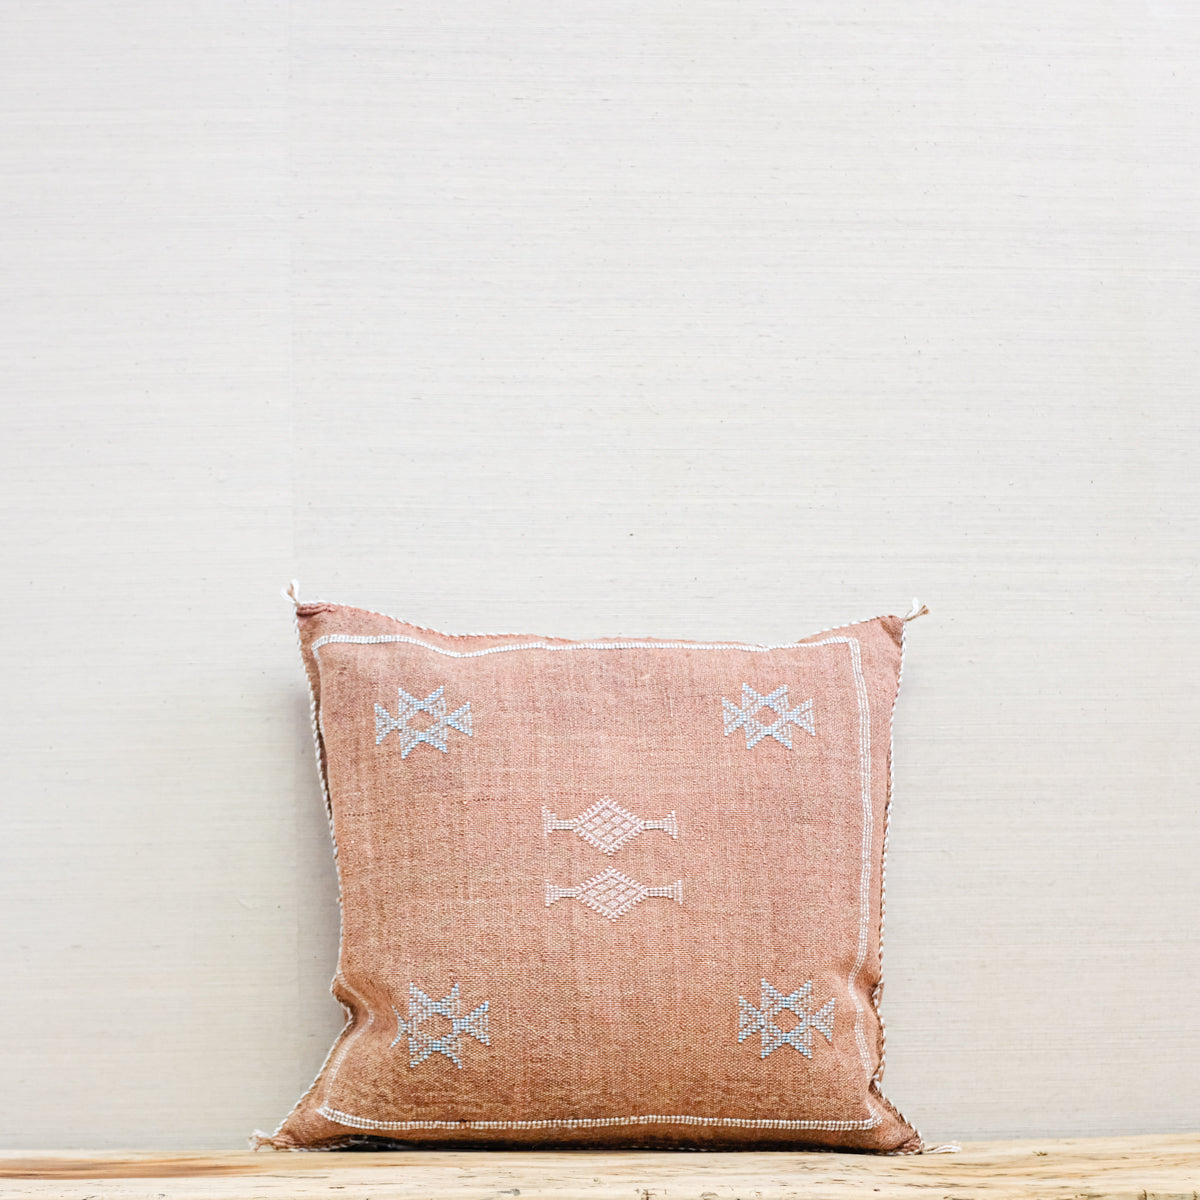 russet colored square pillow, woven with embroidery